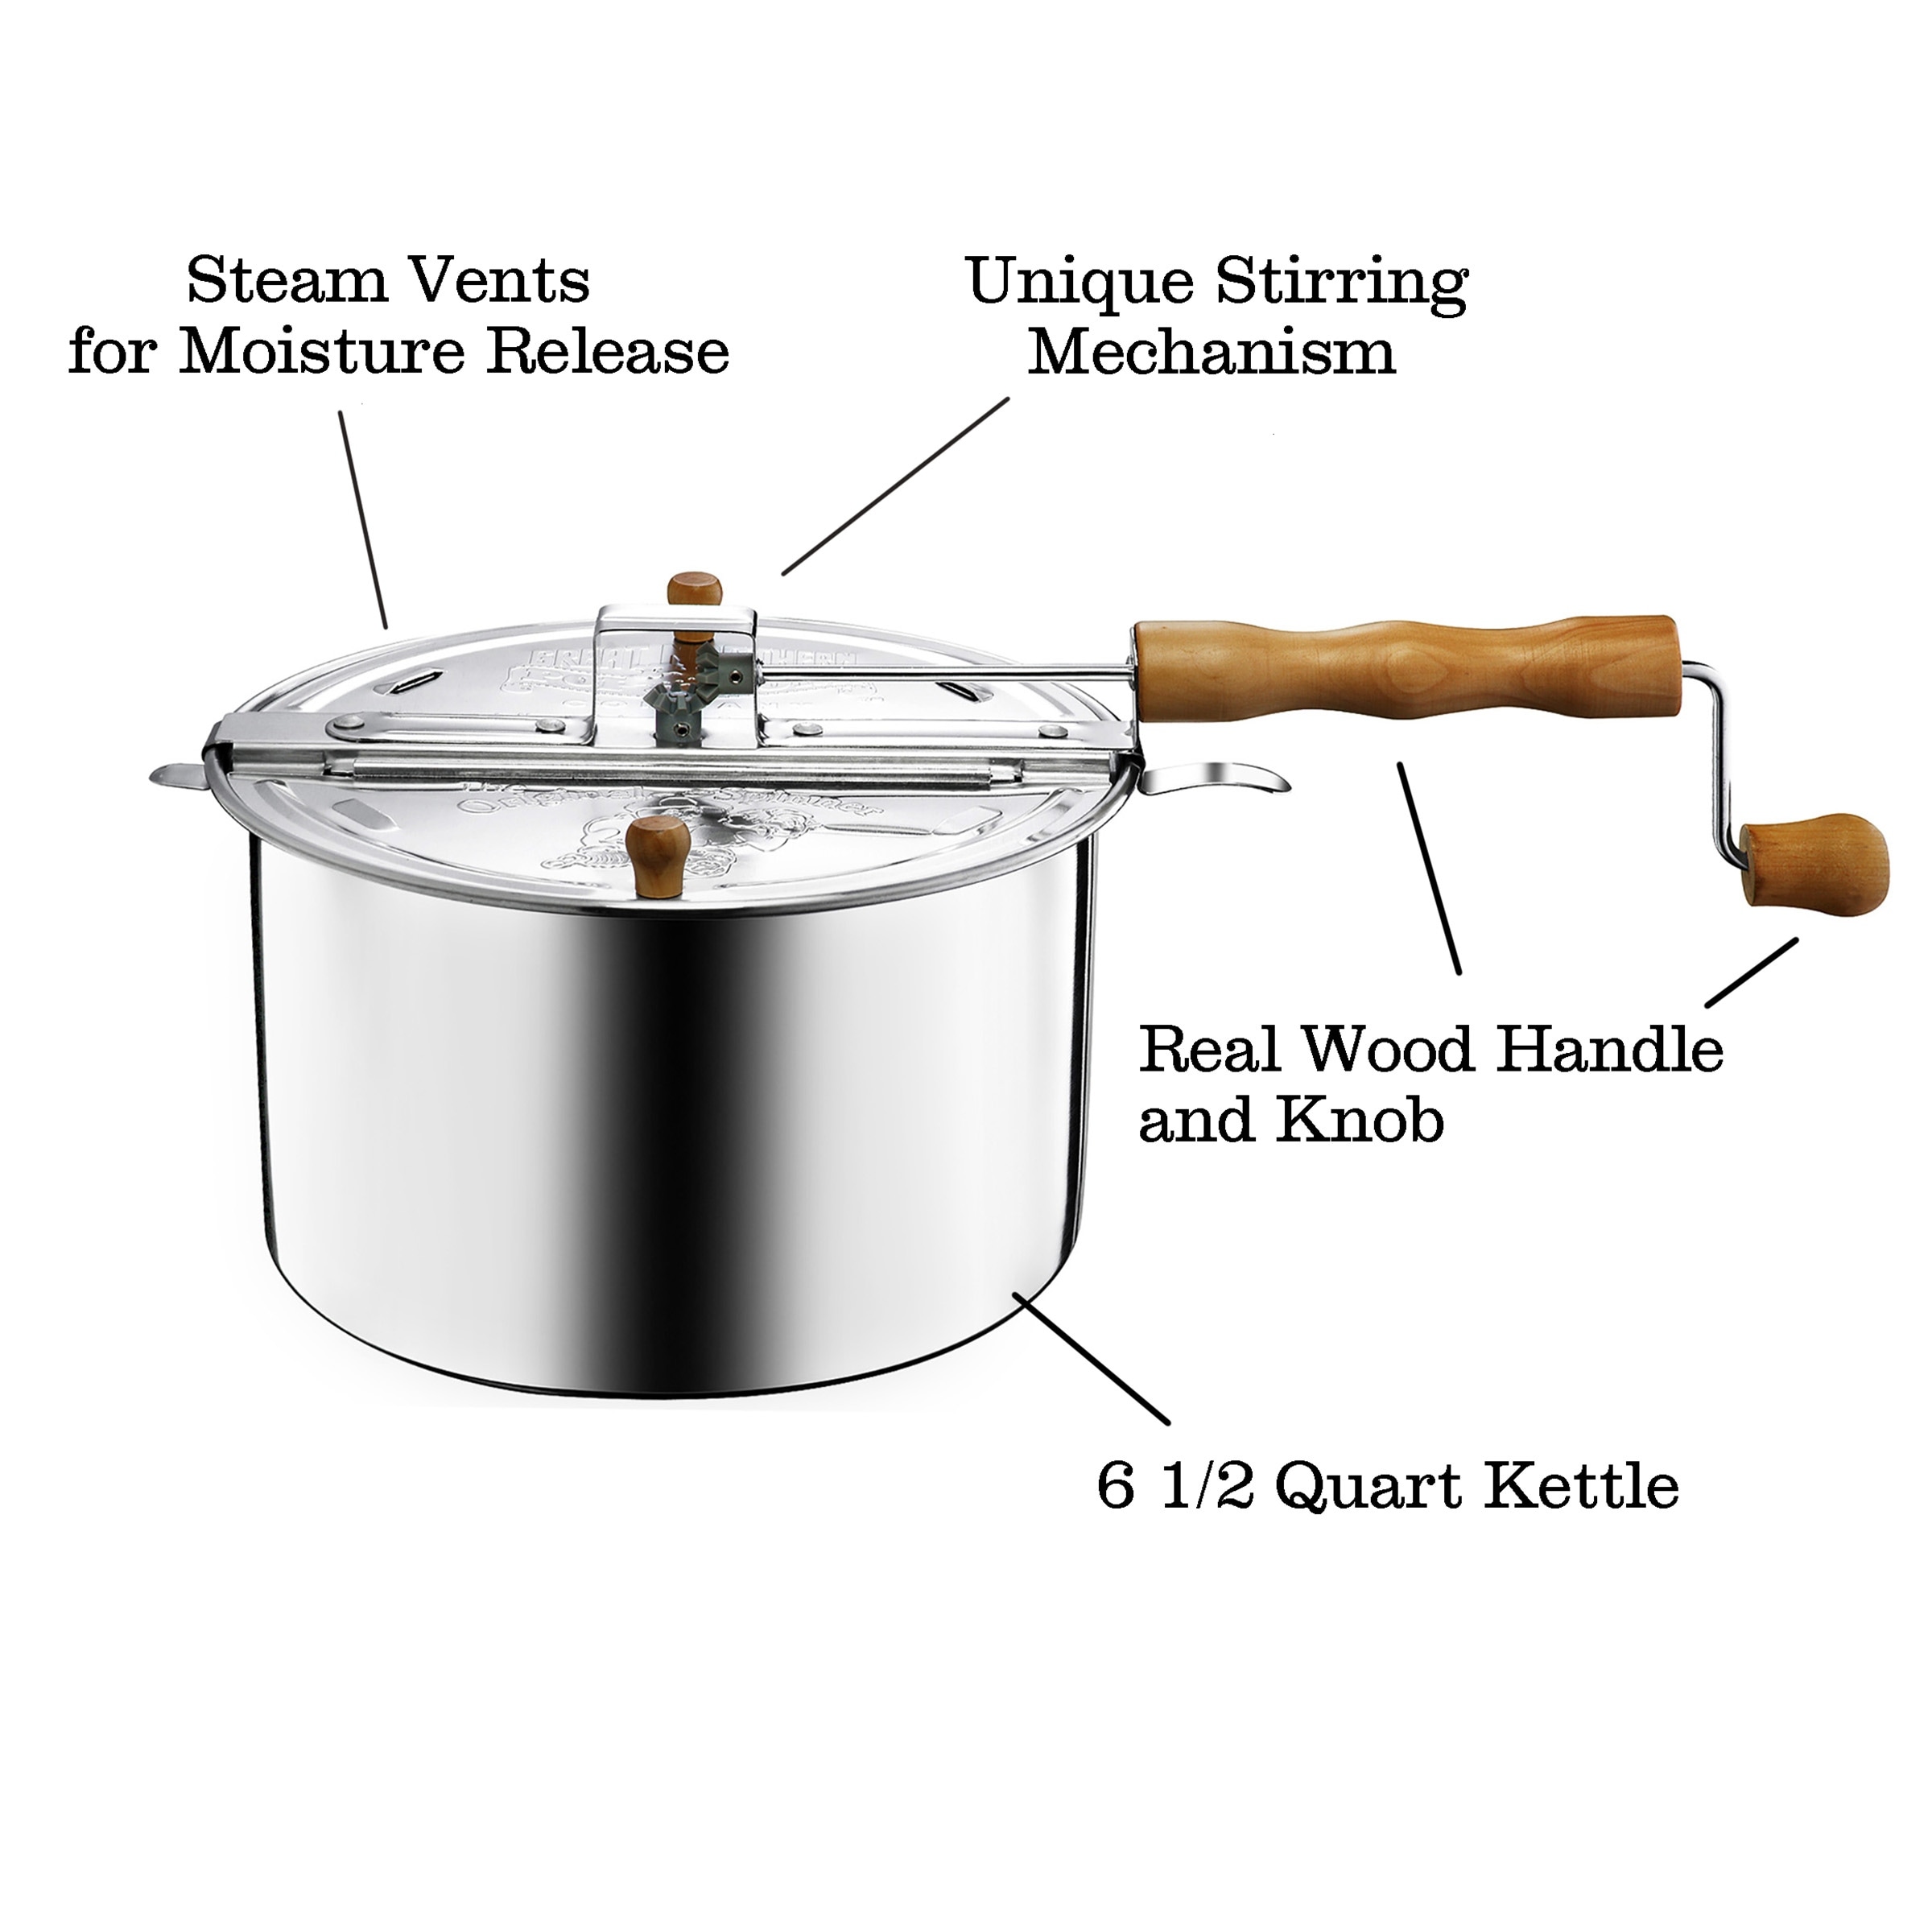 https://ak1.ostkcdn.com/images/products/is/images/direct/c6c4ecebf37cc023c64cb0be901112e8485e7caf/Stove-Top-Popcorn-Maker-%E2%80%93-6.5-Quart-Stainless-Steel-Popper-with-7lbs-of-Popping-Corn-Kernels-by-Great-Northern-Popcorn.jpg